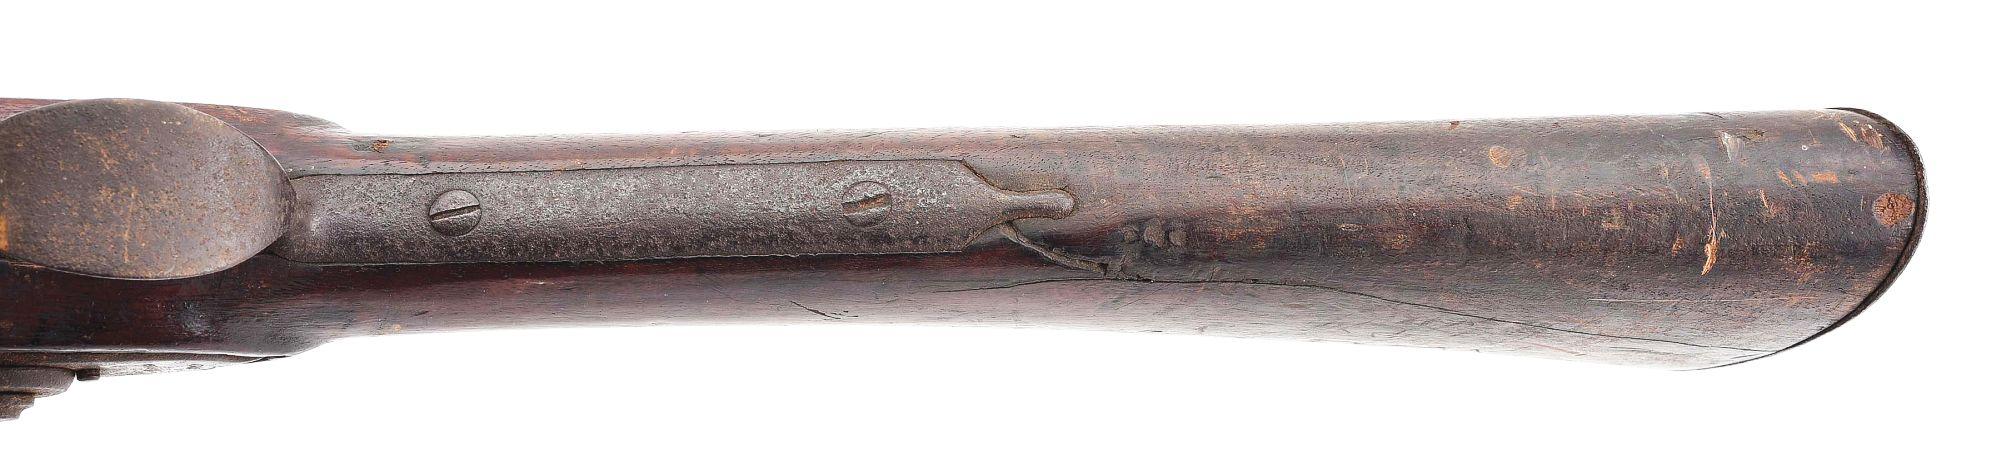 (A) "AS FOUND" 1807 DATED VIRGINIA MANUFACTORY FIRST MODEL FLINTLOCK MUSKET.